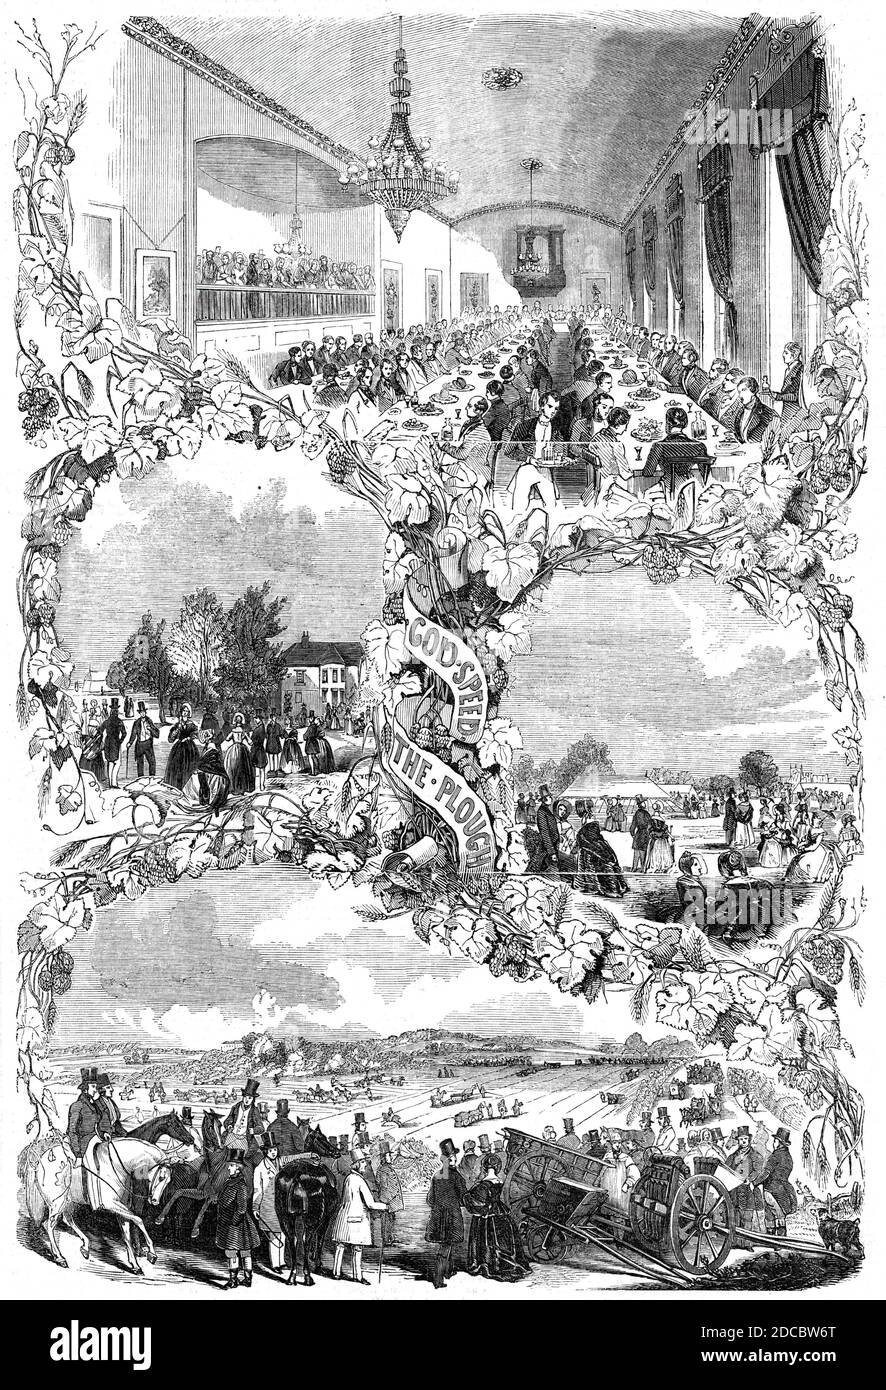 The Council Dinner at the Victoria Archery Rooms, the Trial of Implements at Swathling, 1844. Scenes during the annual show of the Royal Agricultural Society of England, at Southampton. From &quot;Pictorial Times&quot;, 1844. Stock Photo